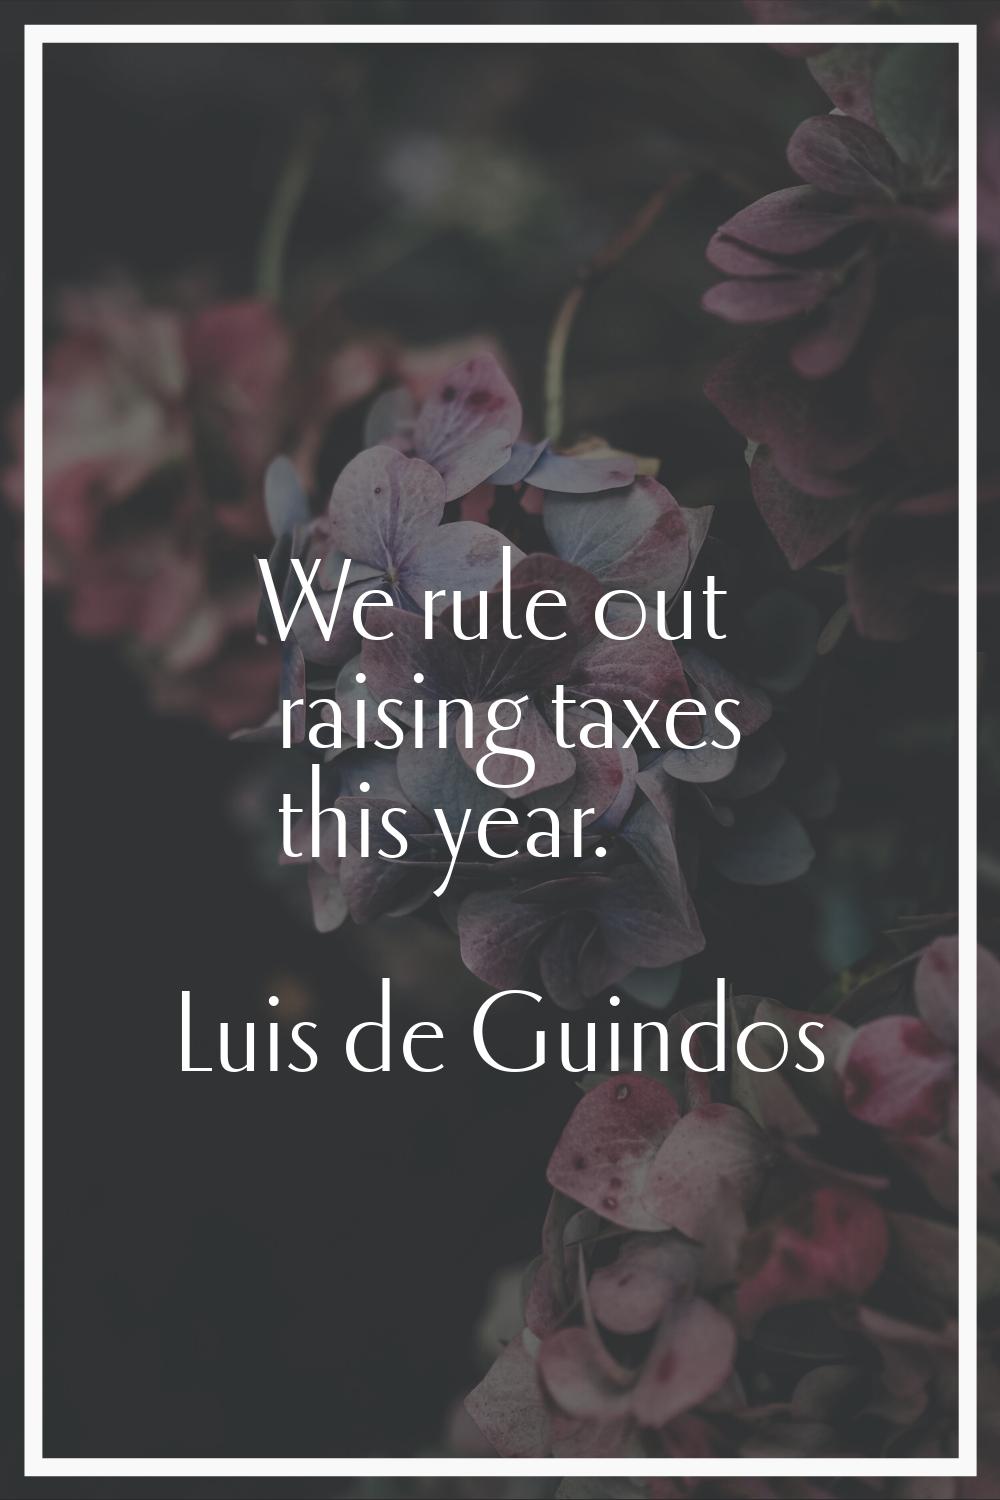 We rule out raising taxes this year.